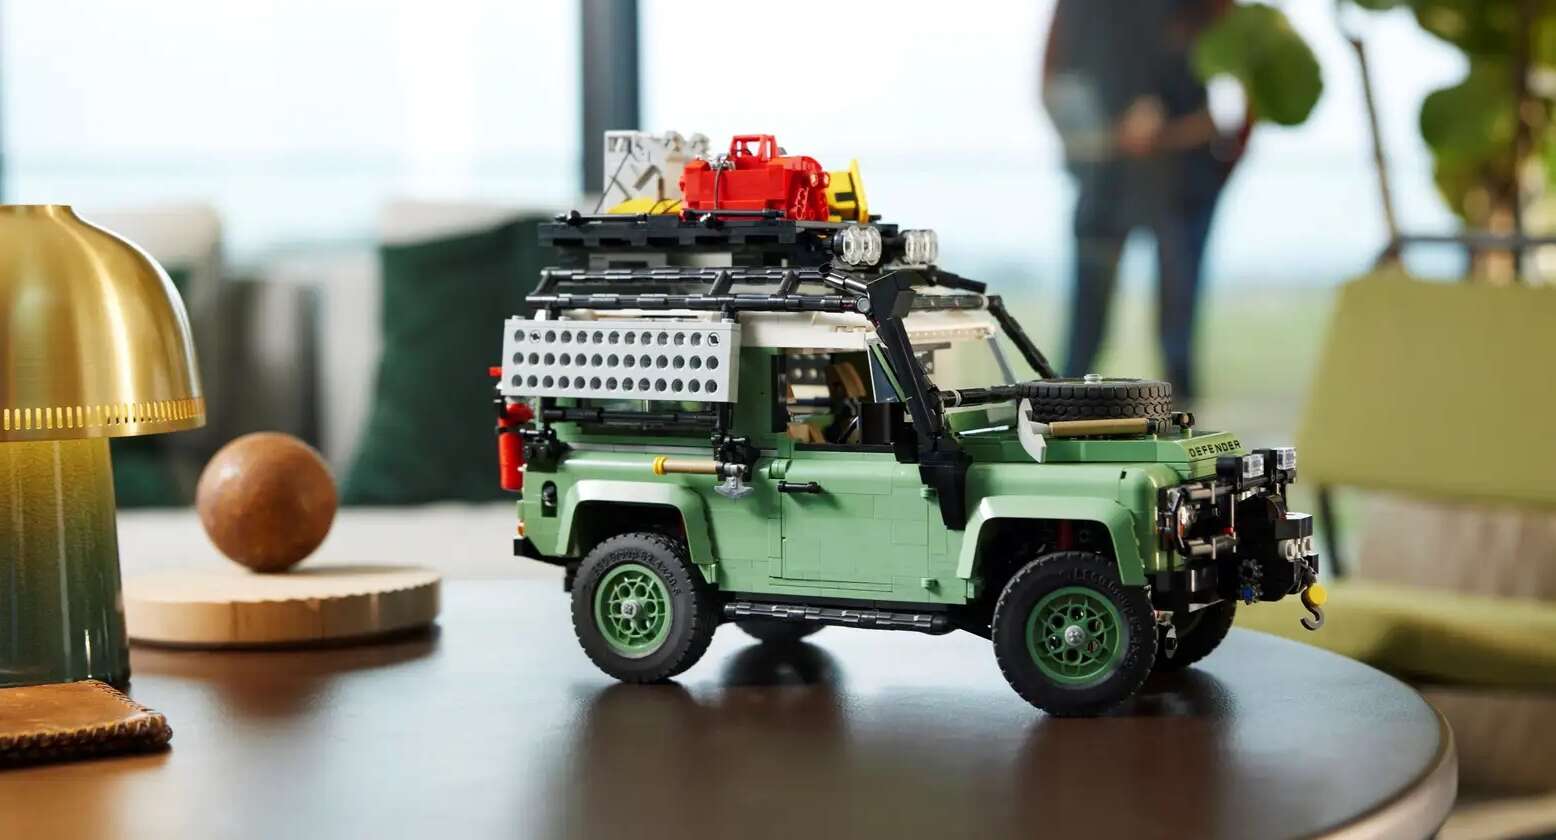 Lego 10317 Classic Defender 90 - 2,336 piece set in launching on